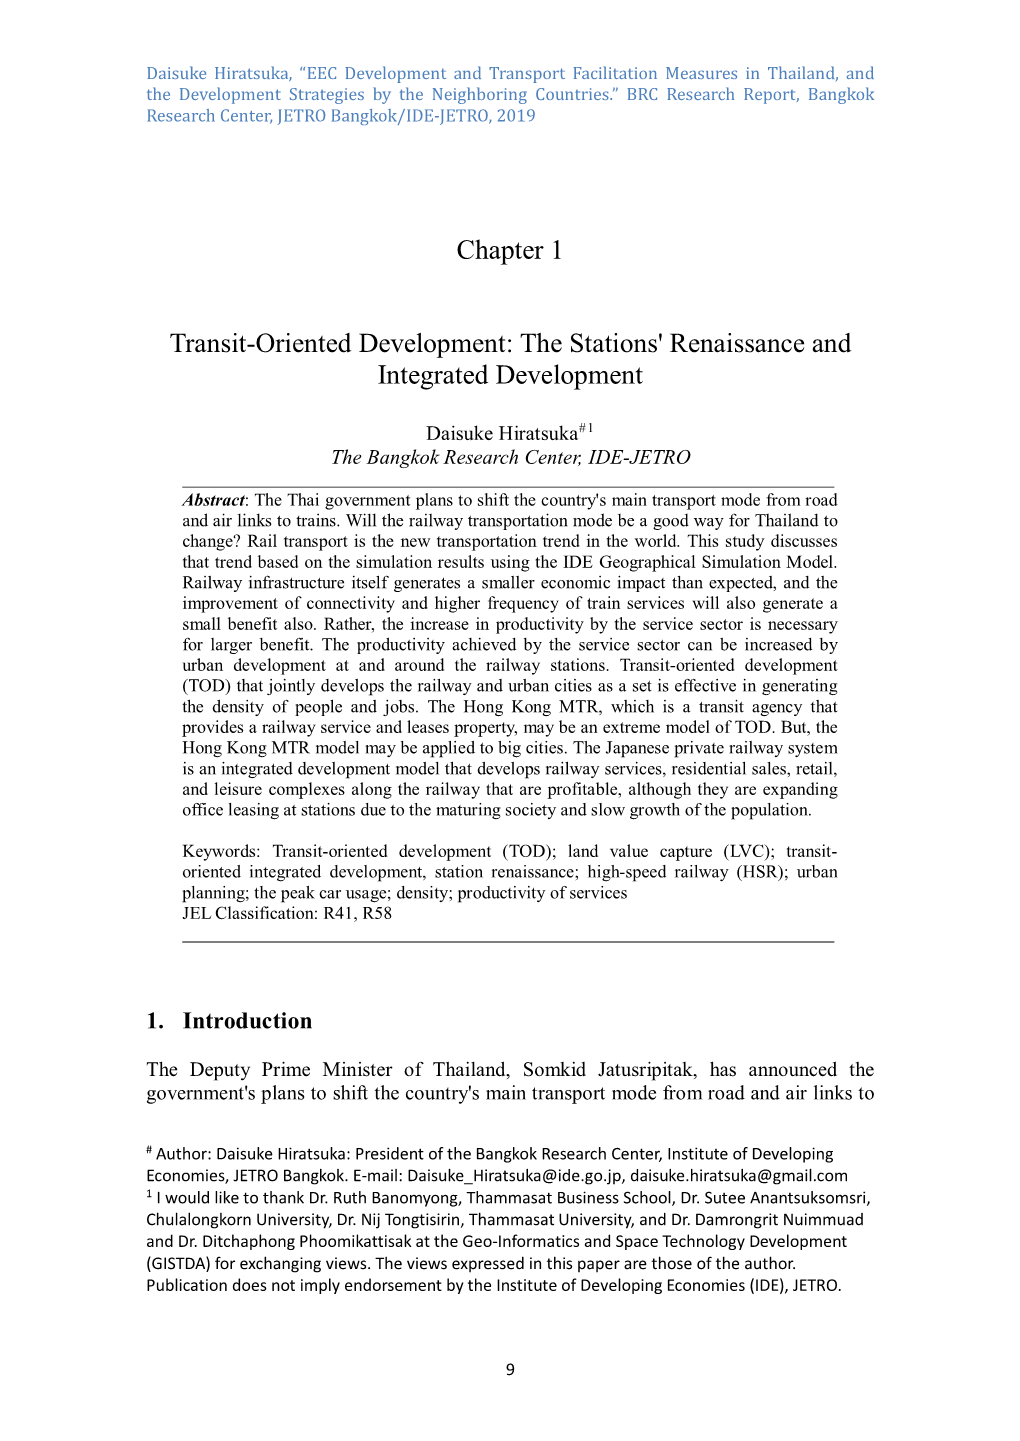 Transit-Oriented Development: the Stations' Renaissance and Integrated Development